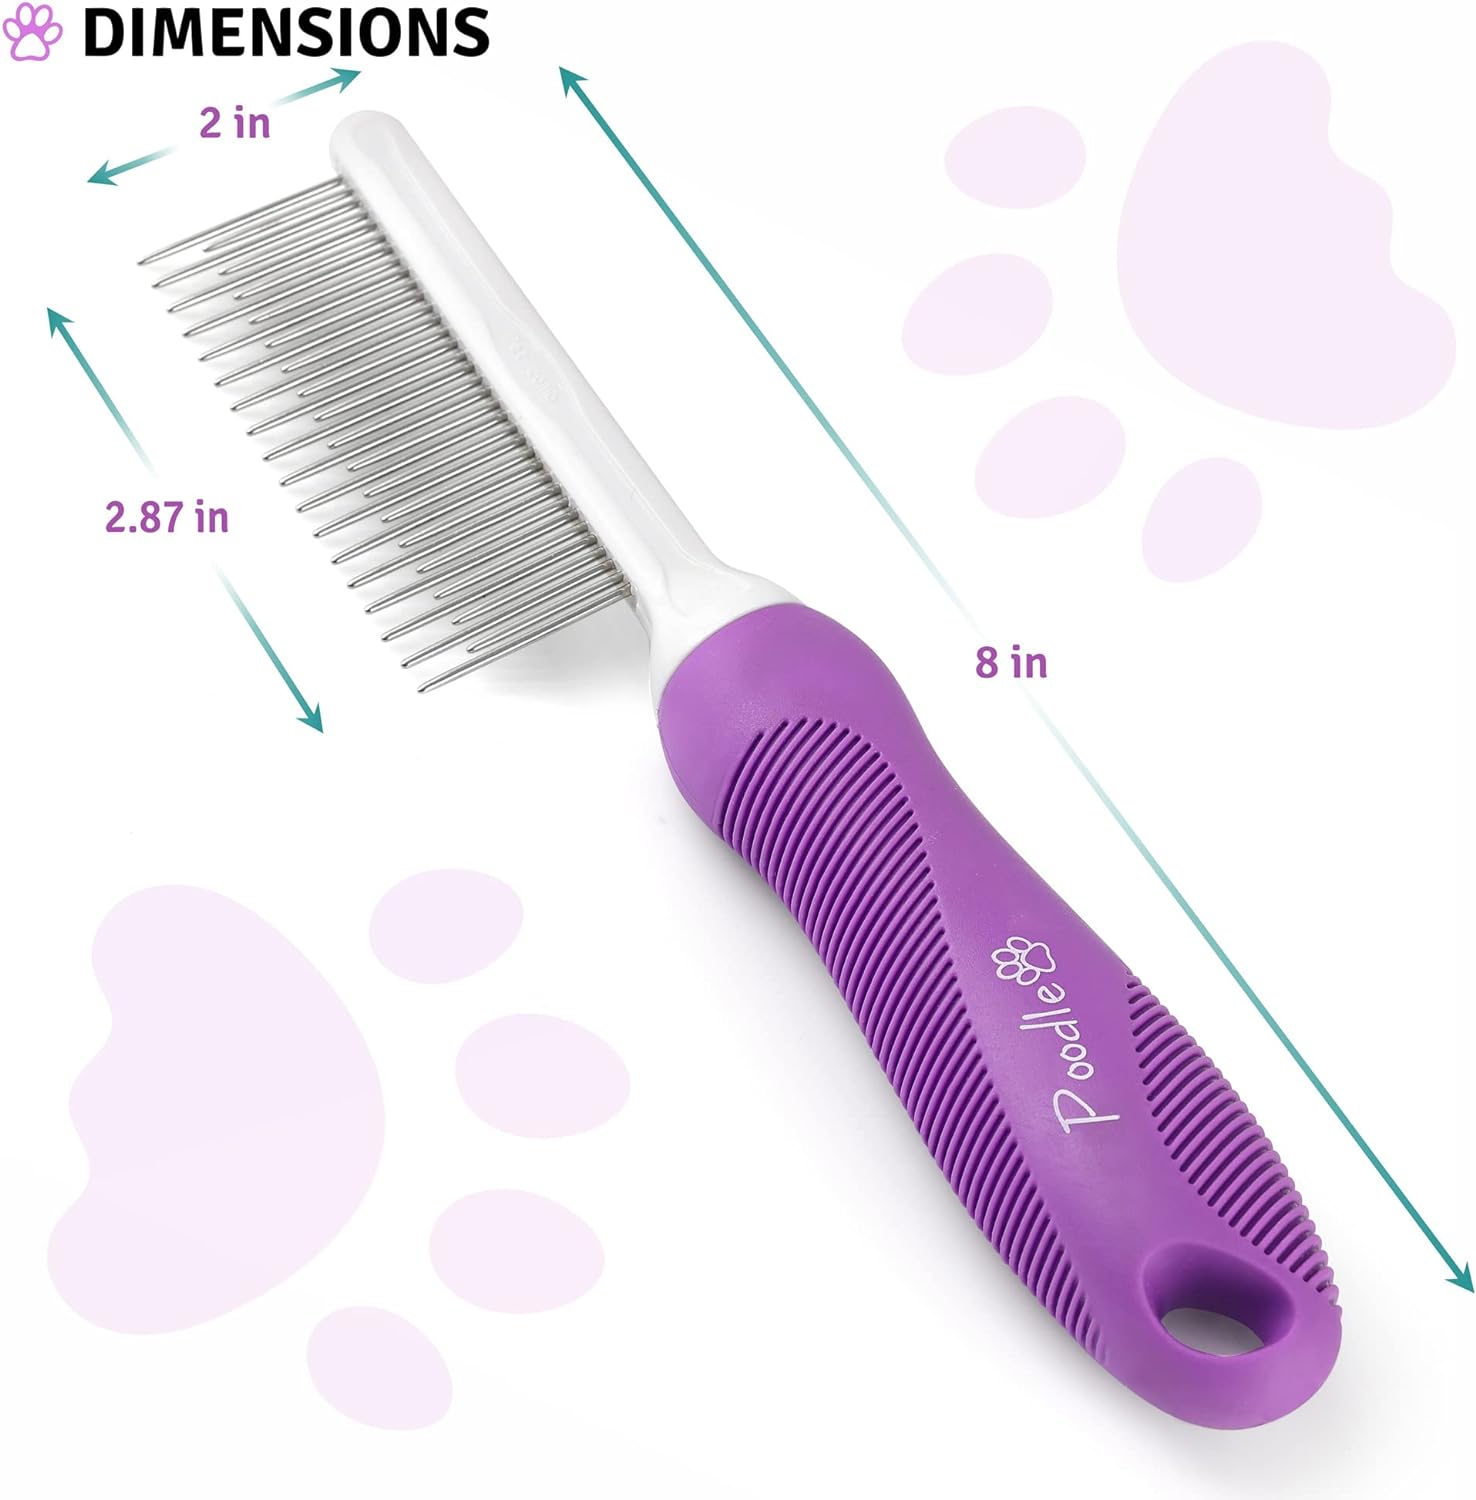 Poodle Pet 2-in-1 Stainless Steel Detangler Comb Cat & Dog Grooming Brush - image 7 of 9